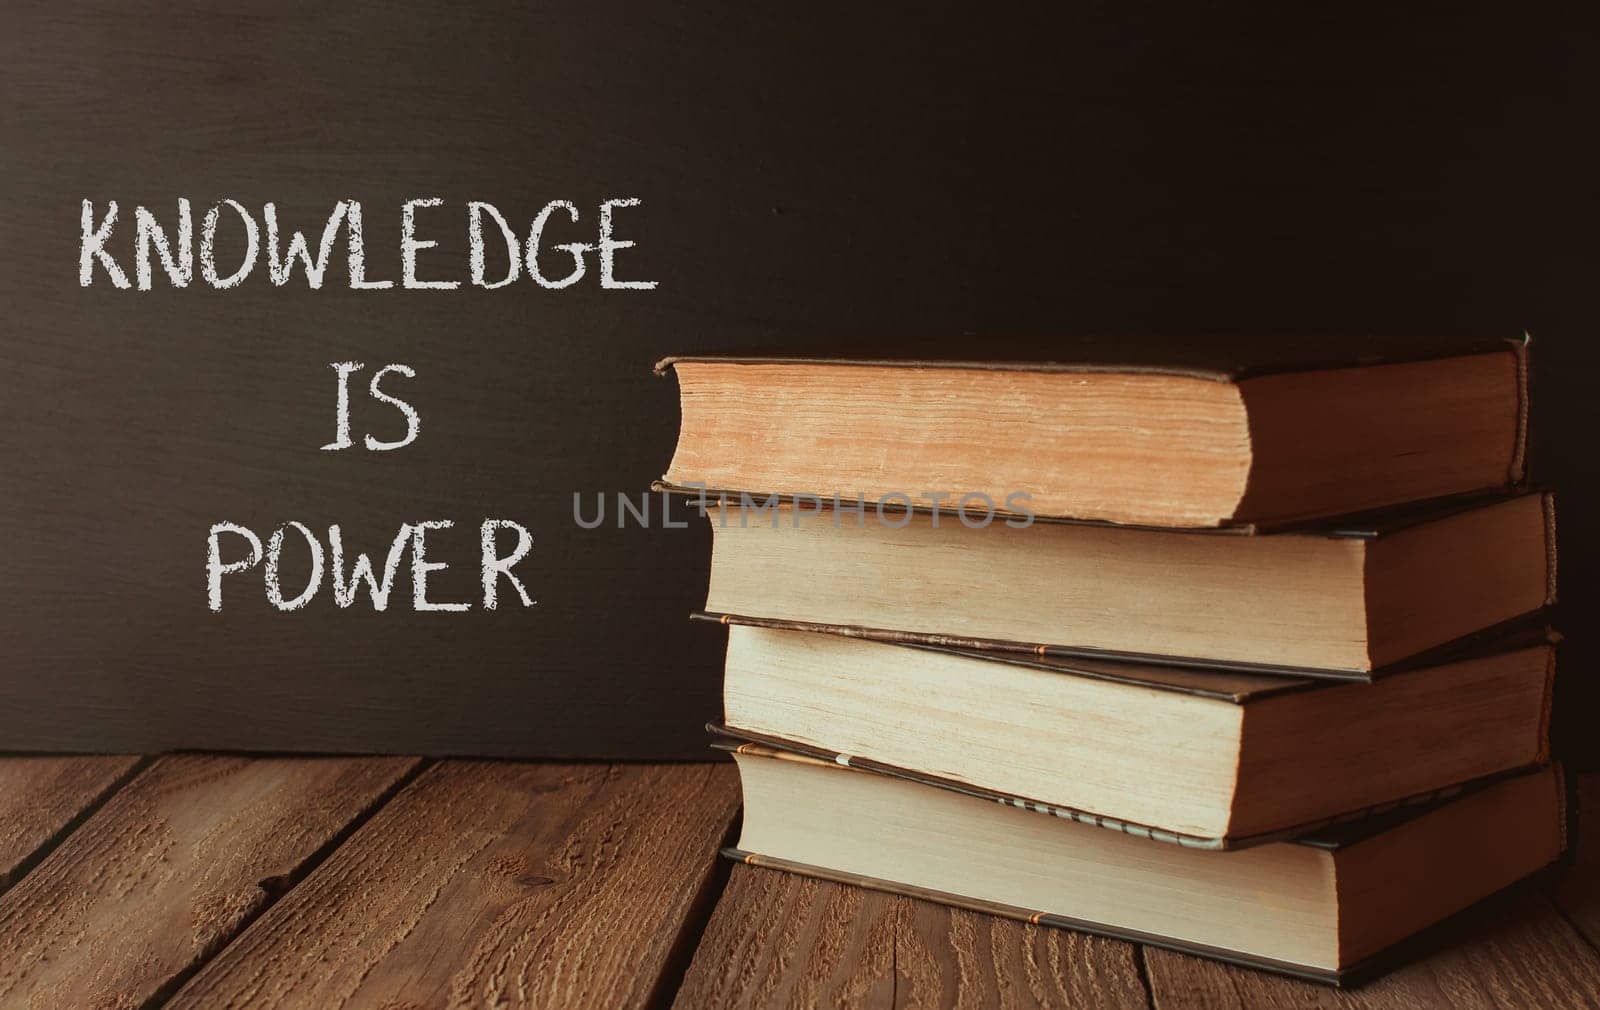 Knowledge is power. The books stacked on top of each other symbolize the importance of education and learning. The chalkboard behind the books serves as a reminder to always seek knowledge